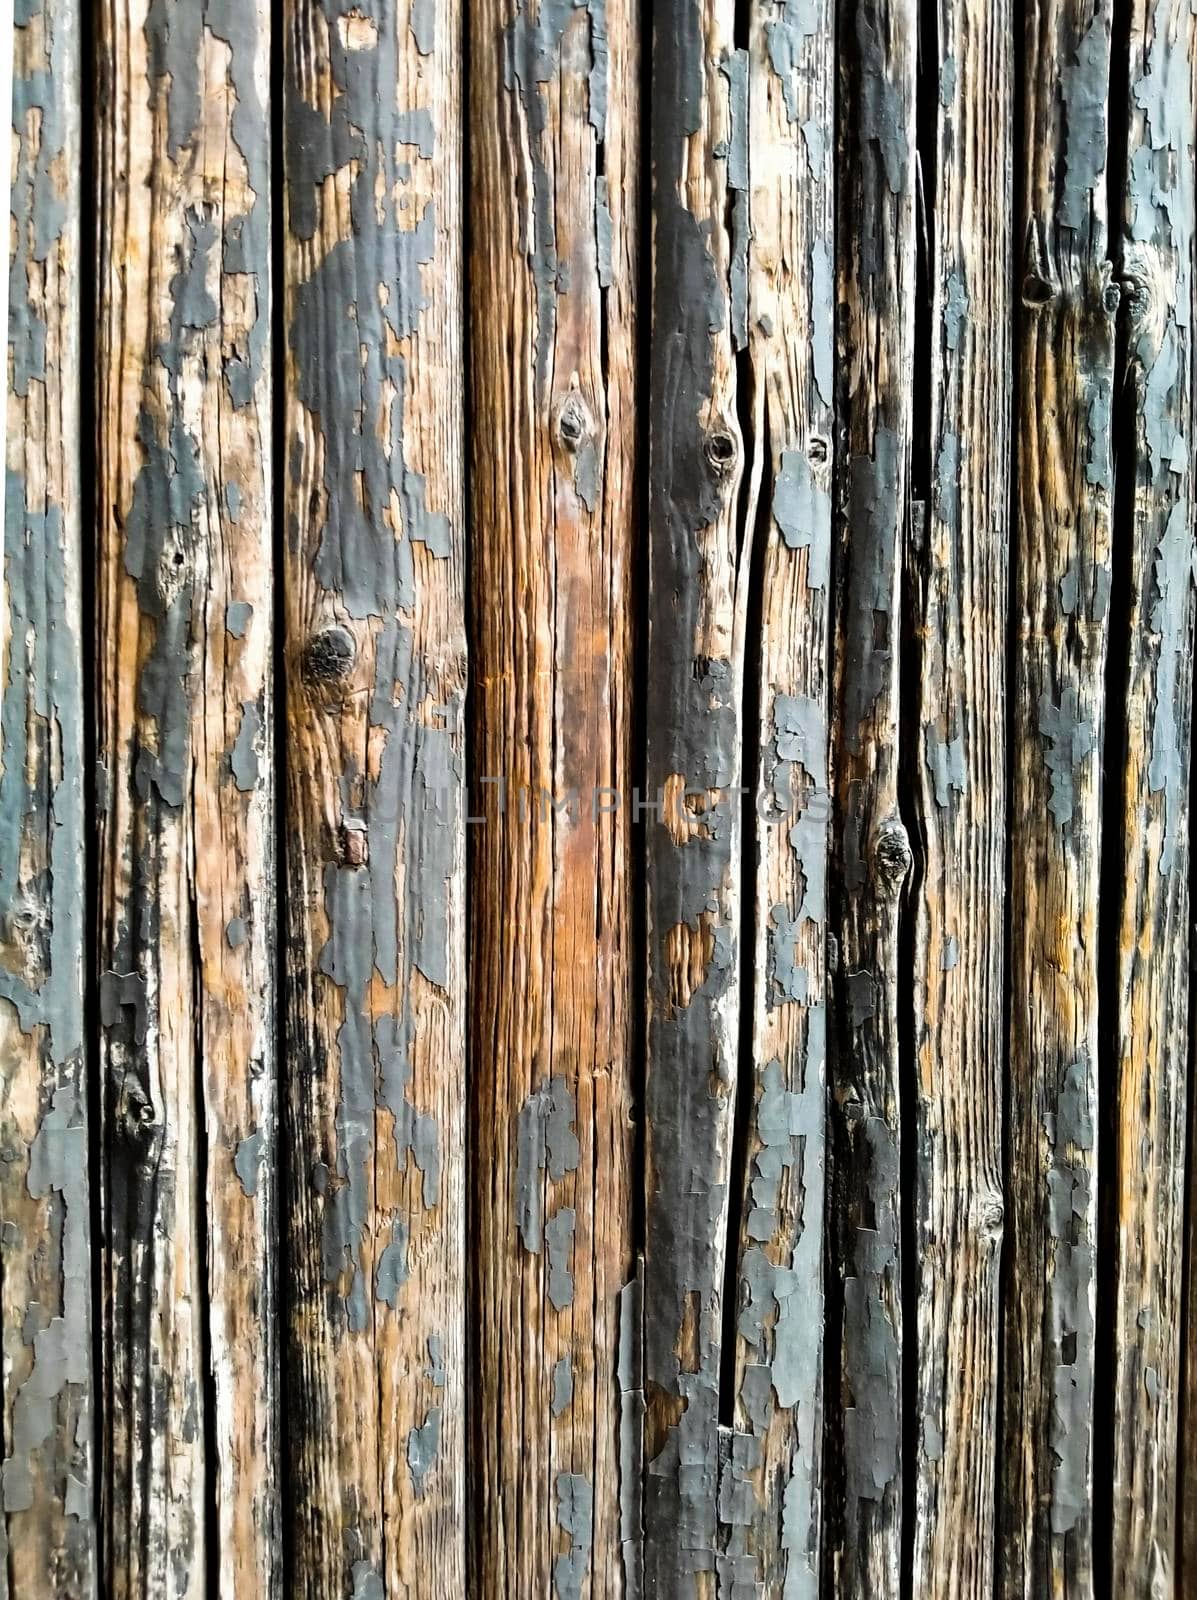 old wooden wall texture . Dark gray weathered wooden boards, wood wall texture background . Brown wood texture. Abstract background . For architecture interior landscape design